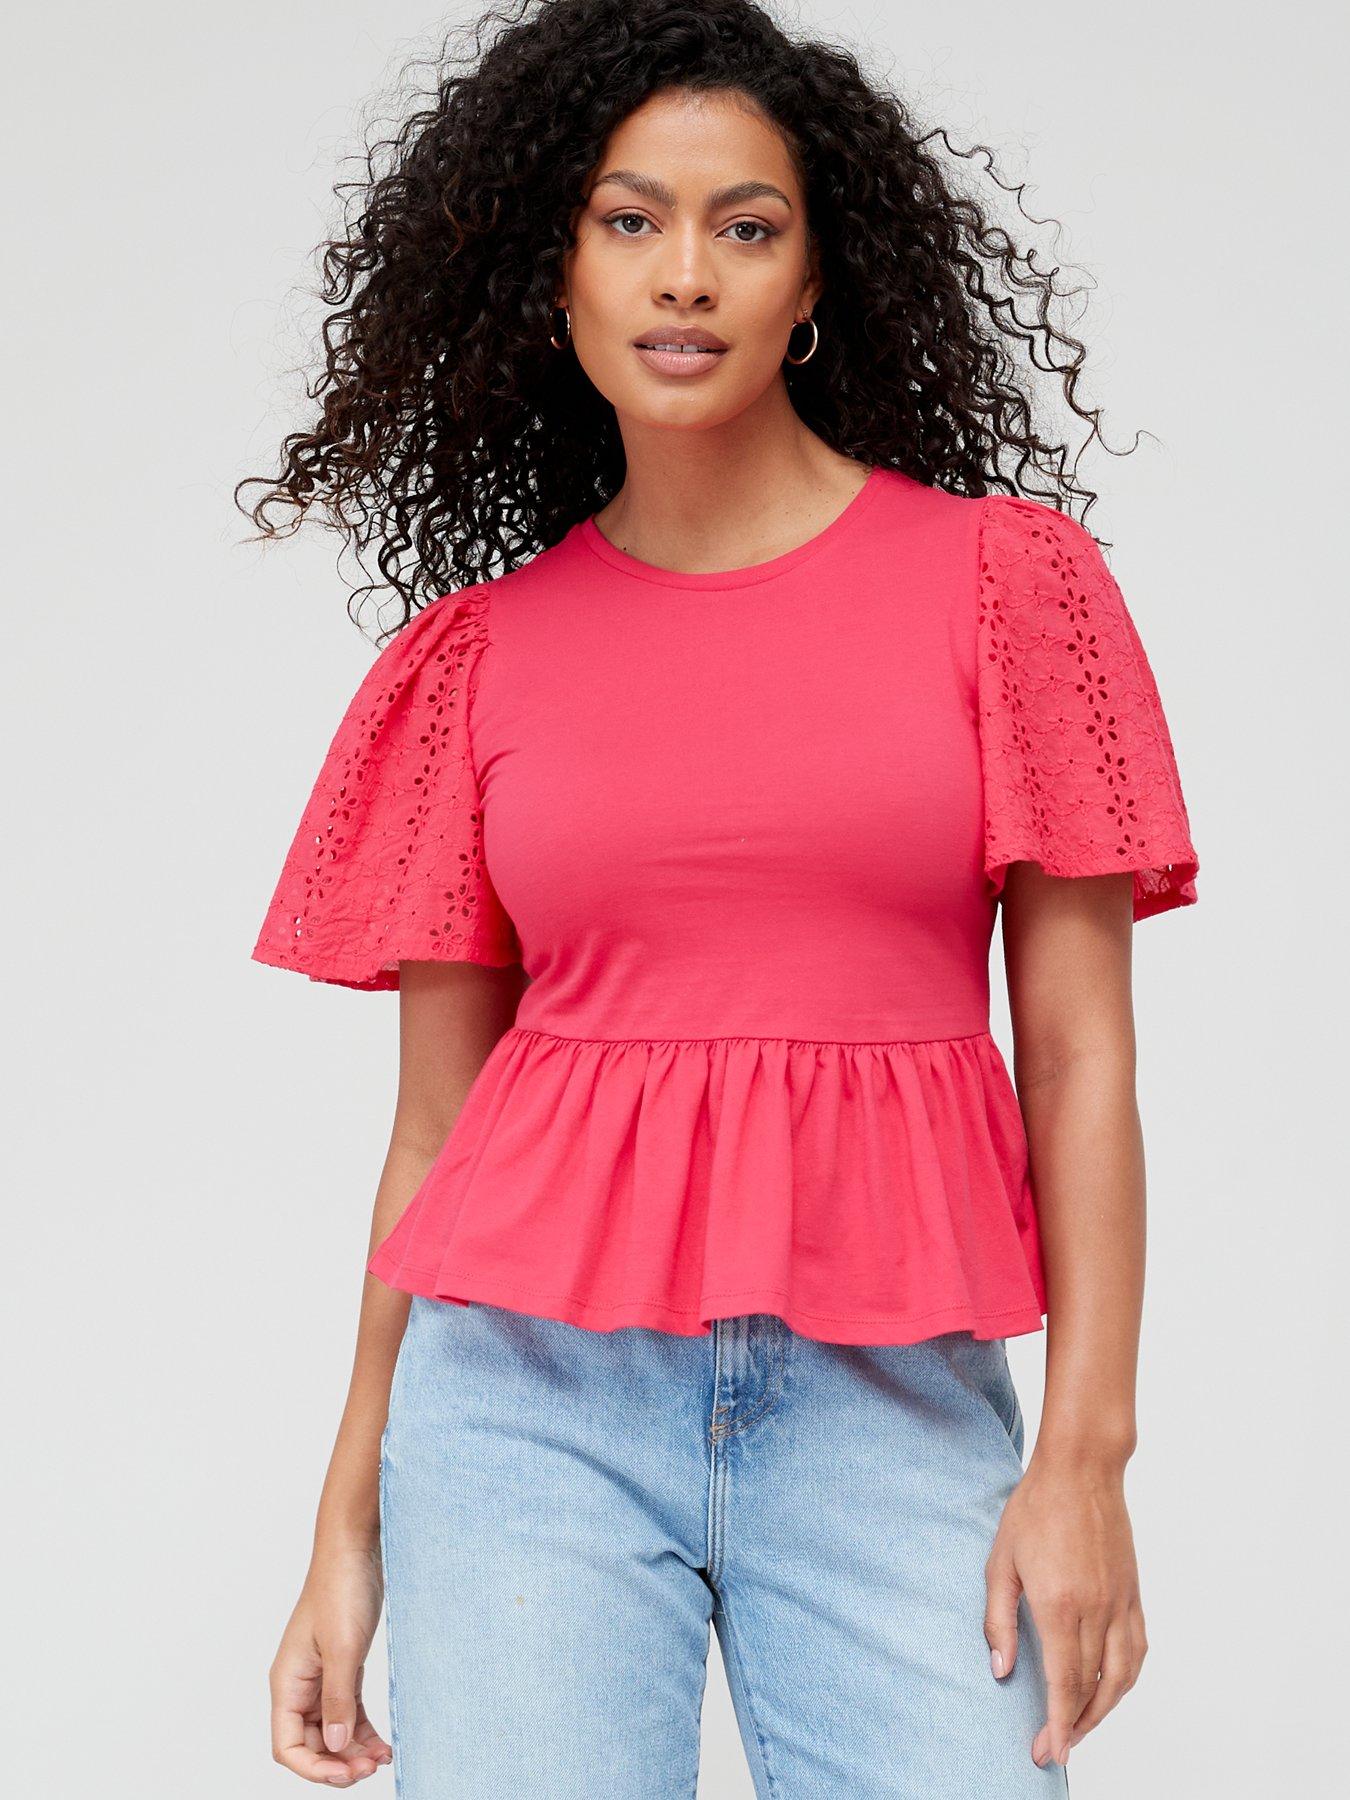 V by Very Frill Sleeve Peplum Top - Pink